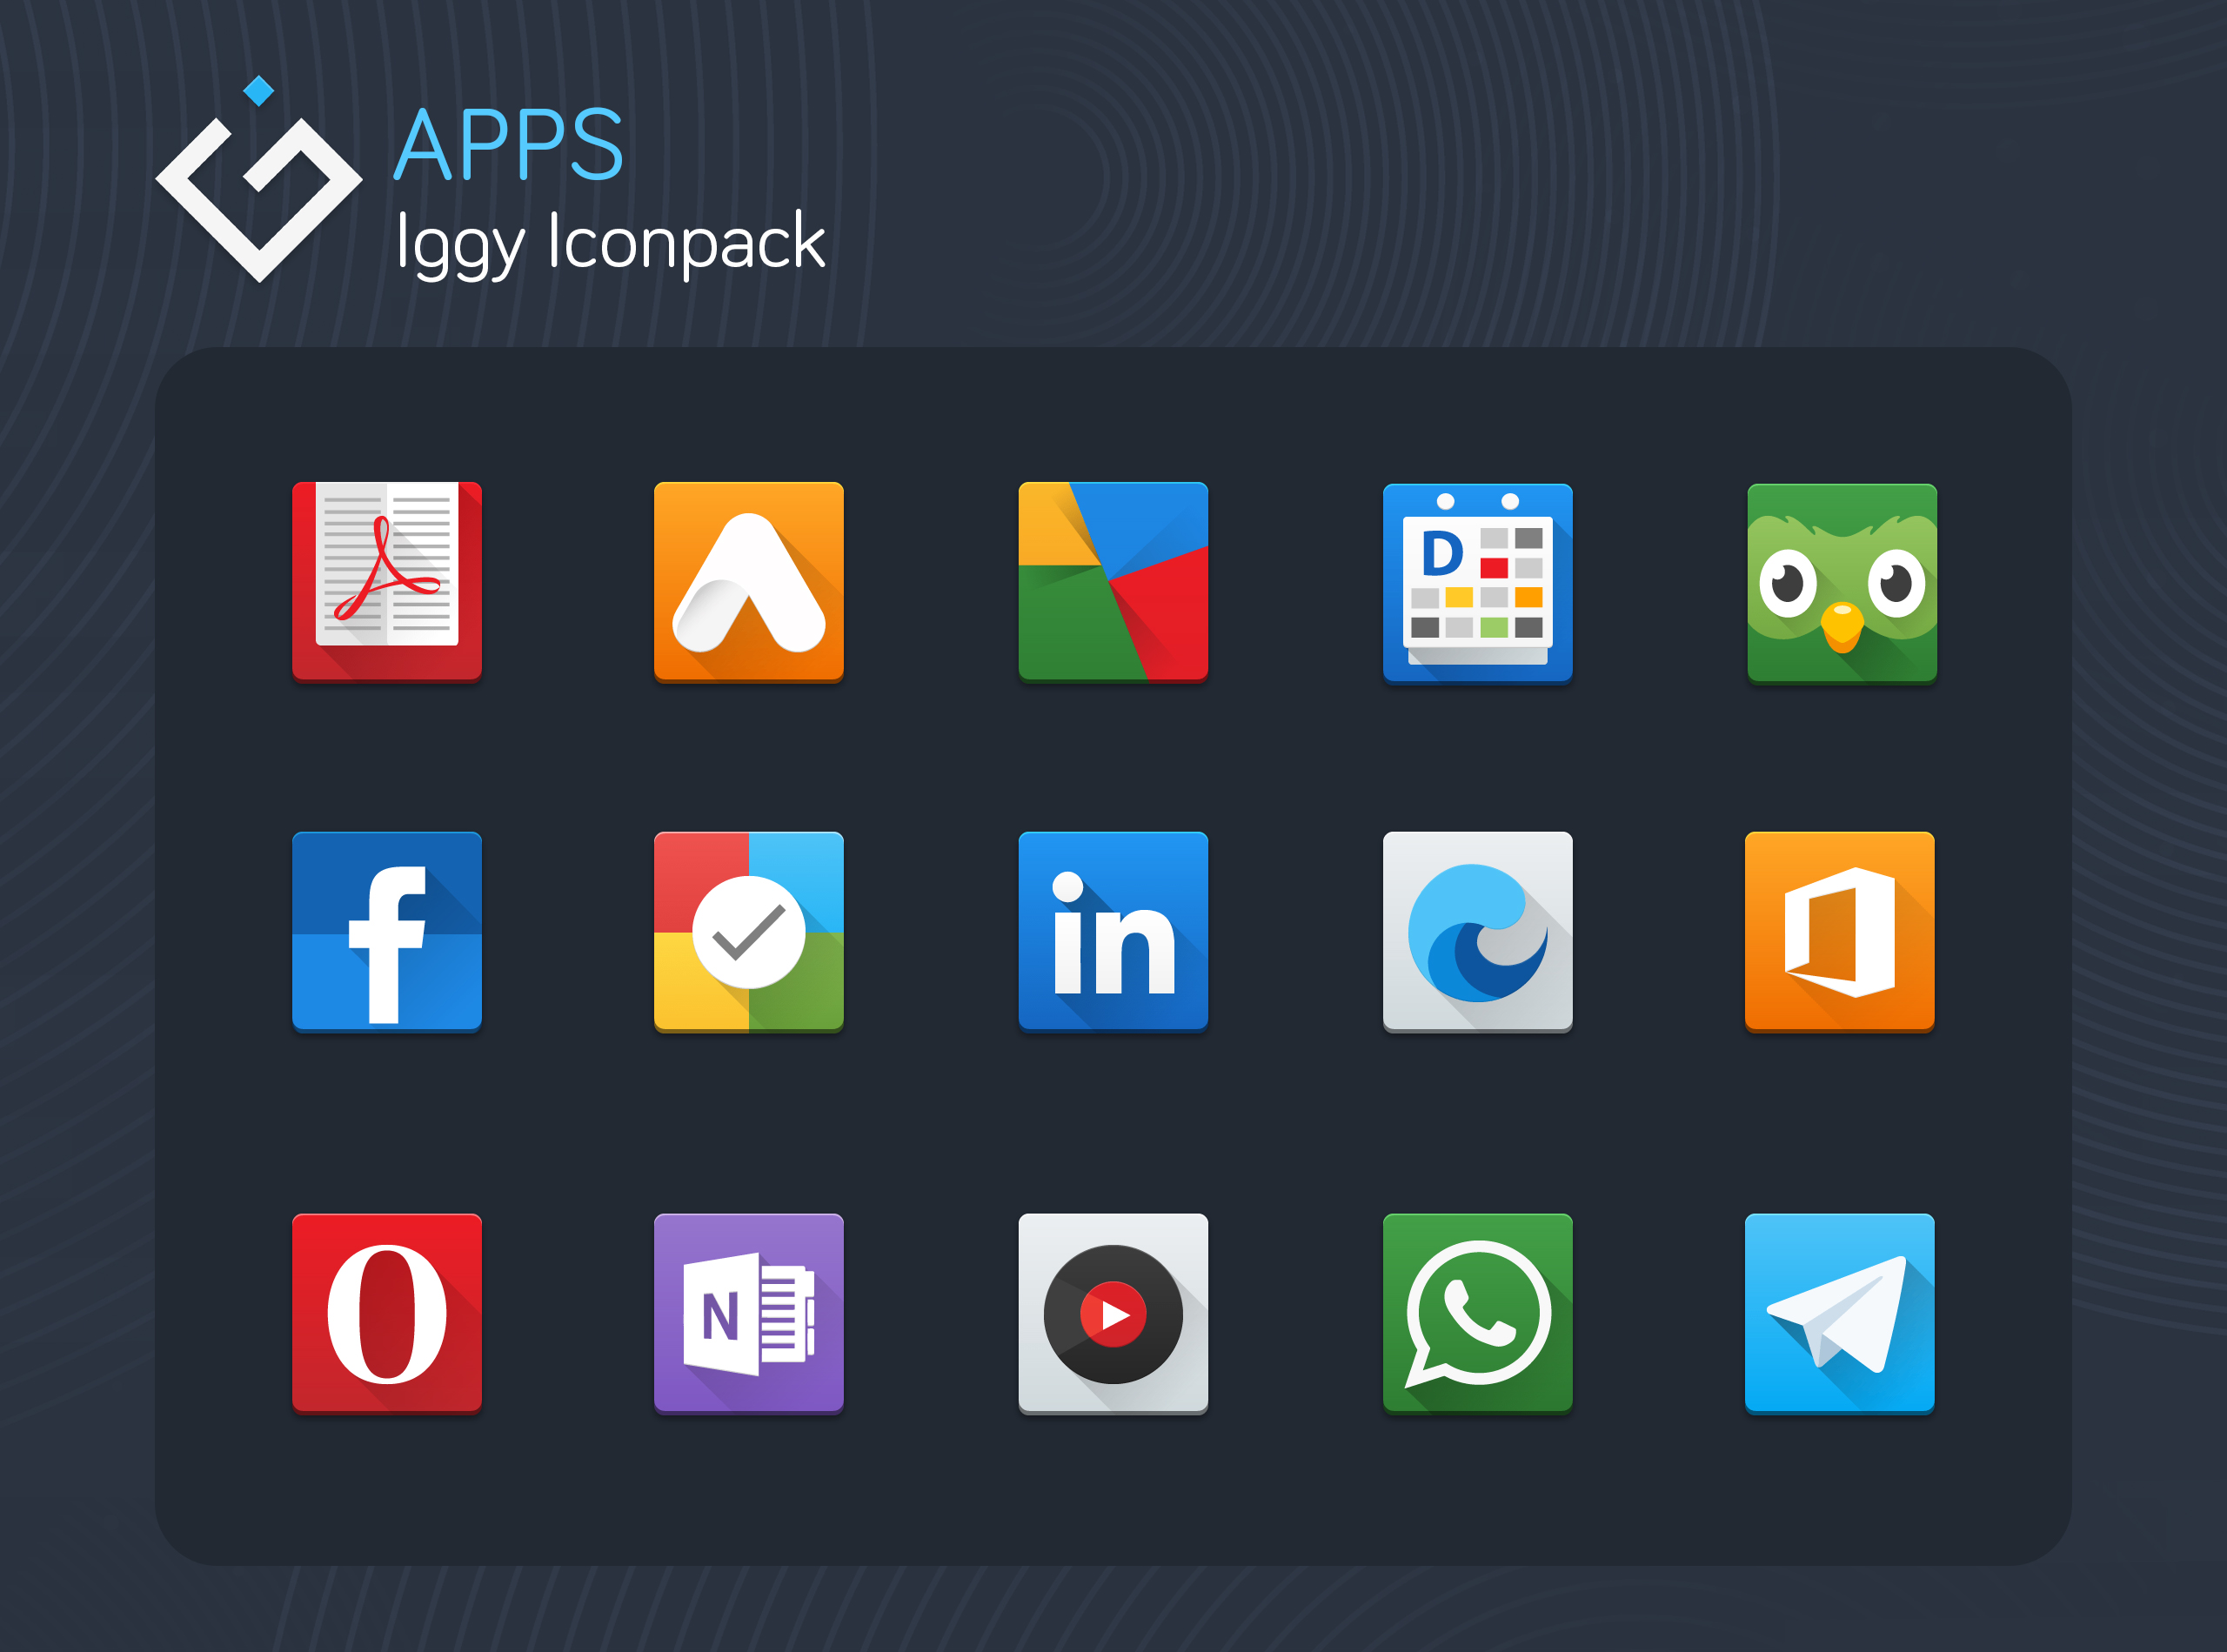 Android application Iggy-Icon Pack screenshort